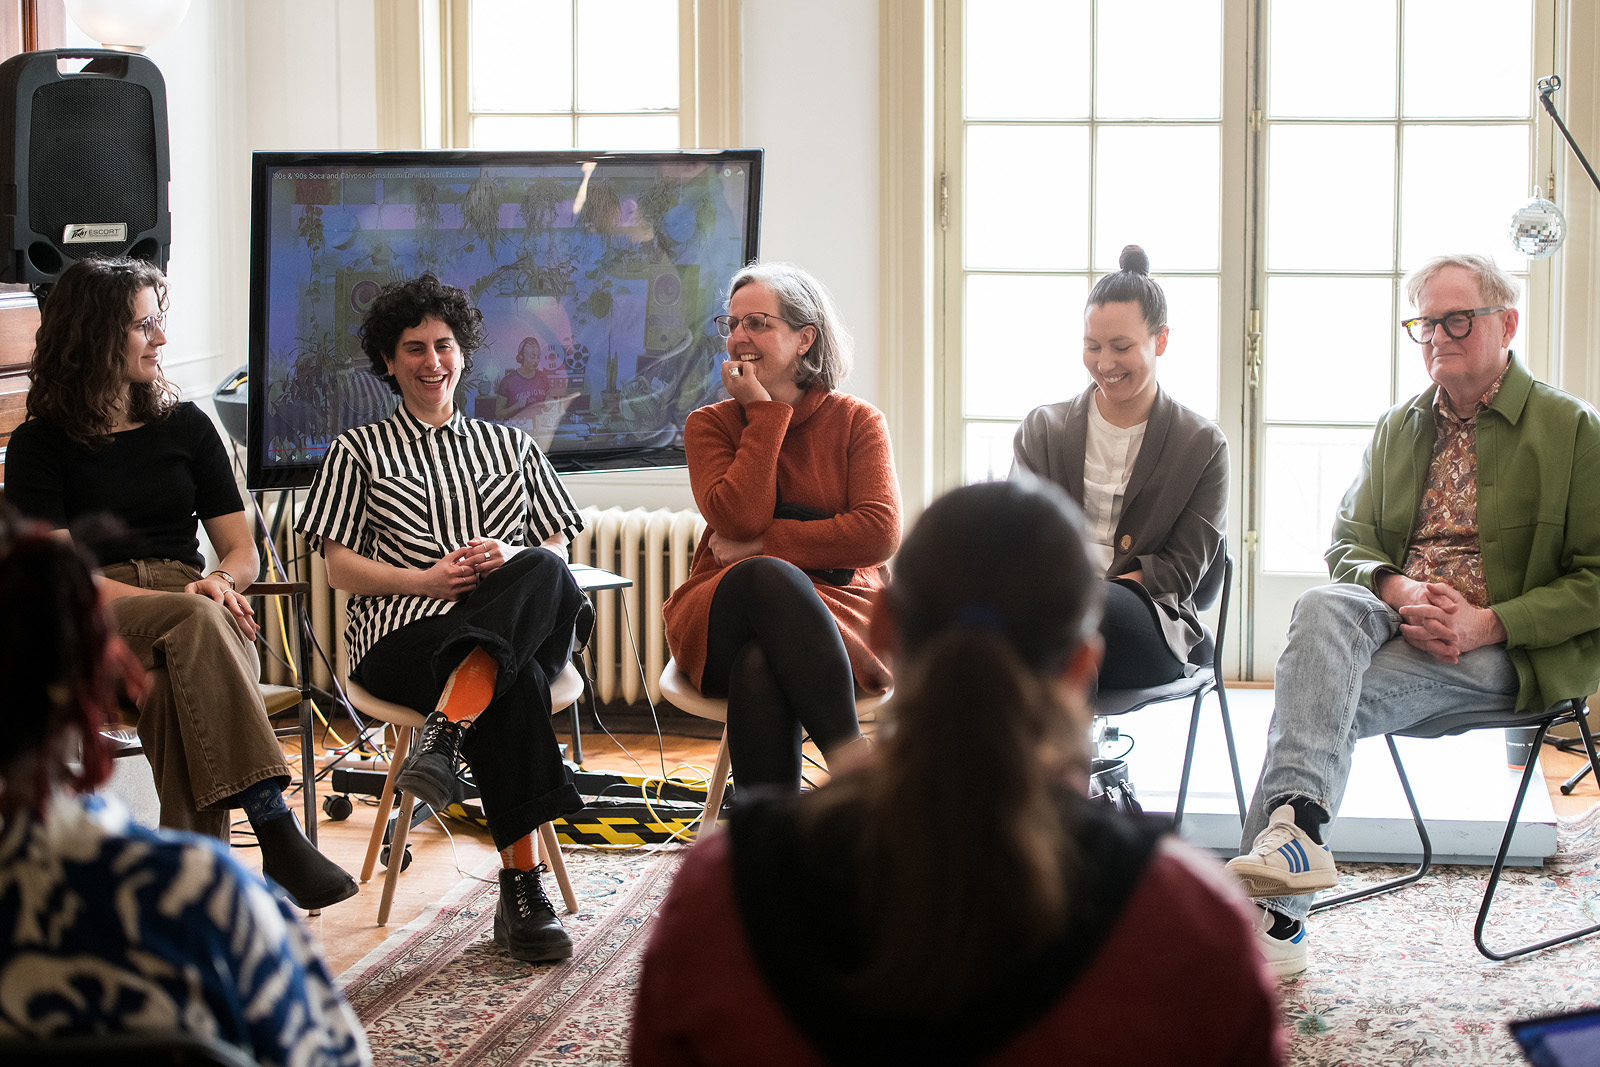 SCCS 830: Curating in Context with Dr Winsom Winsom, Wanda Nanibush, Philip Monk and Cathie Jamieson. Agnes's Chief Curator, Alicia Boutilier, and Bader Curator of European Art, Suzanne van de Meerendonk, also joined in.